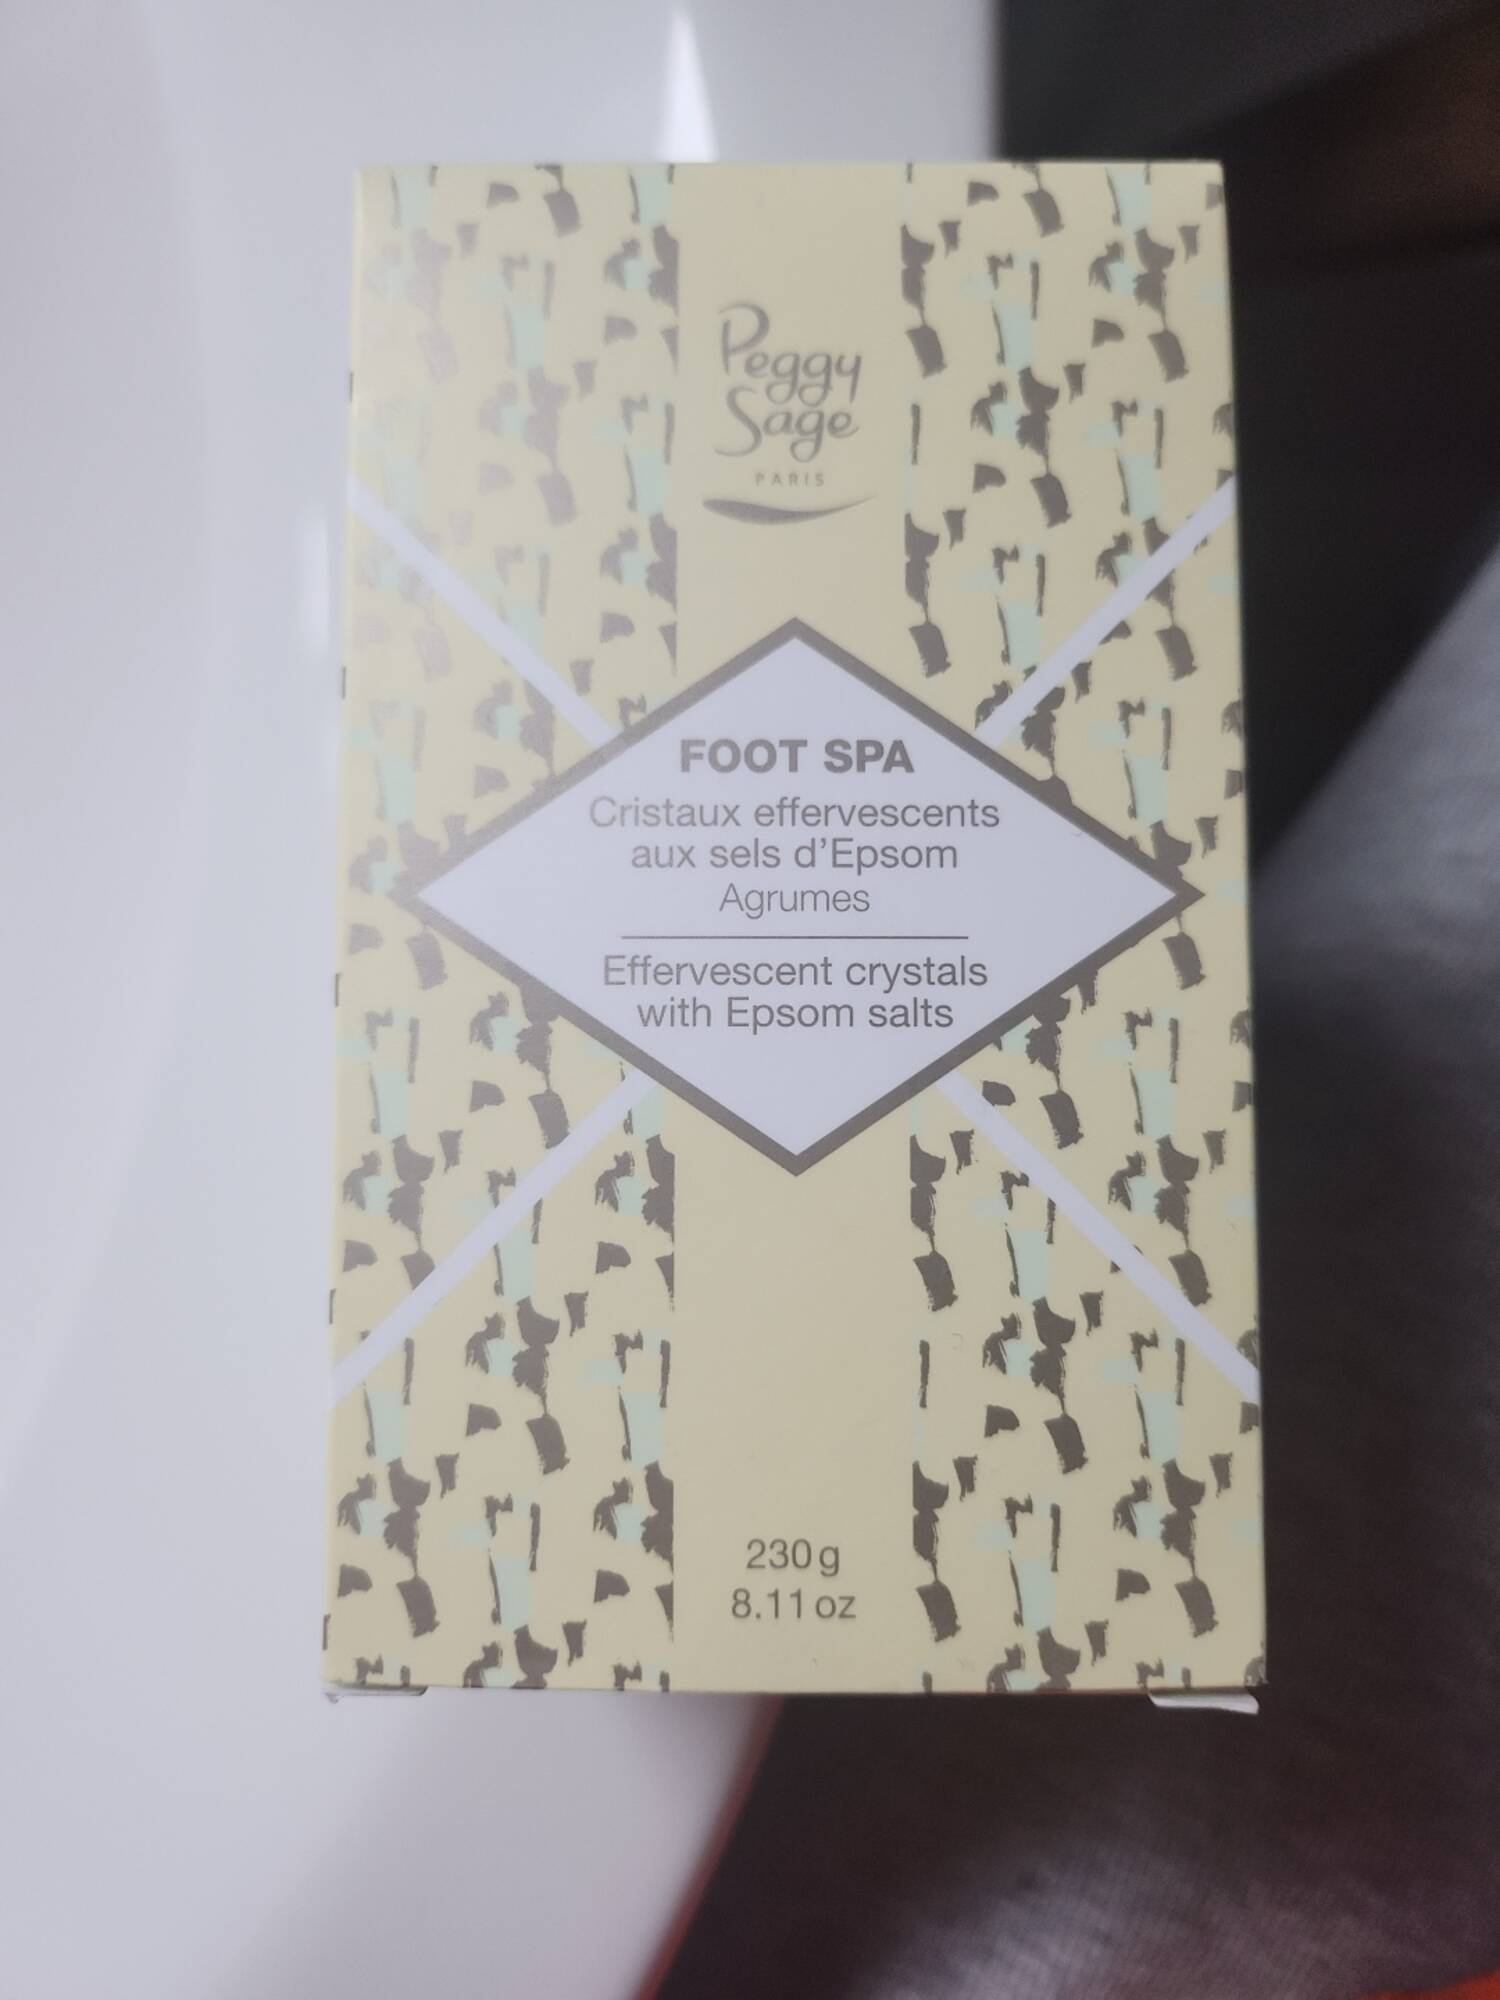 PEGGY SAGE - Foot spa - Cristaux effervescents